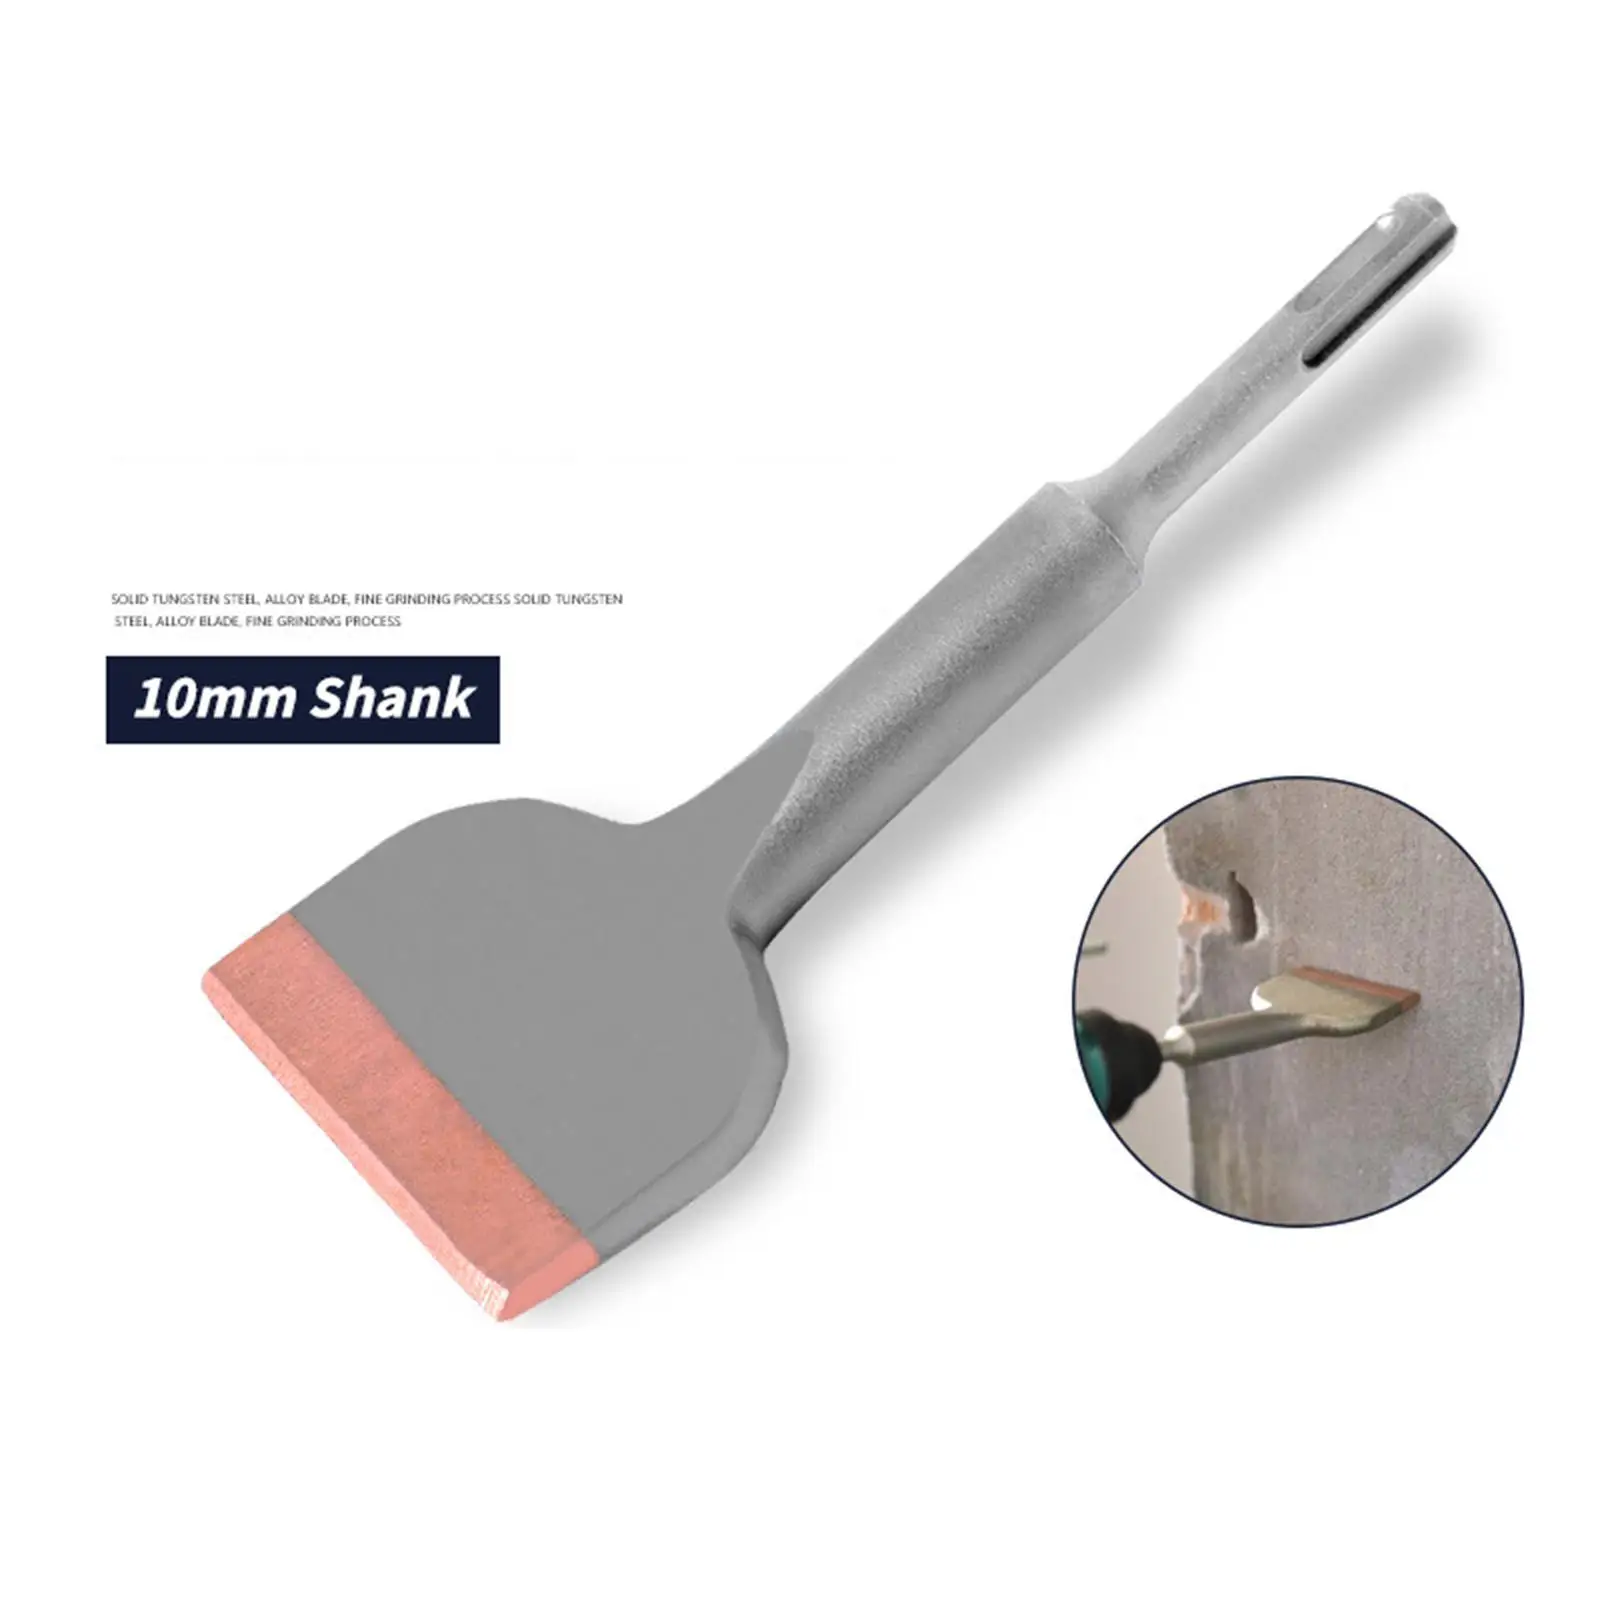 Floor Tile Removal Chisel Tile Remover Flooring Adhesive Remover Bit flat Scaling Chisels for stone Masonry